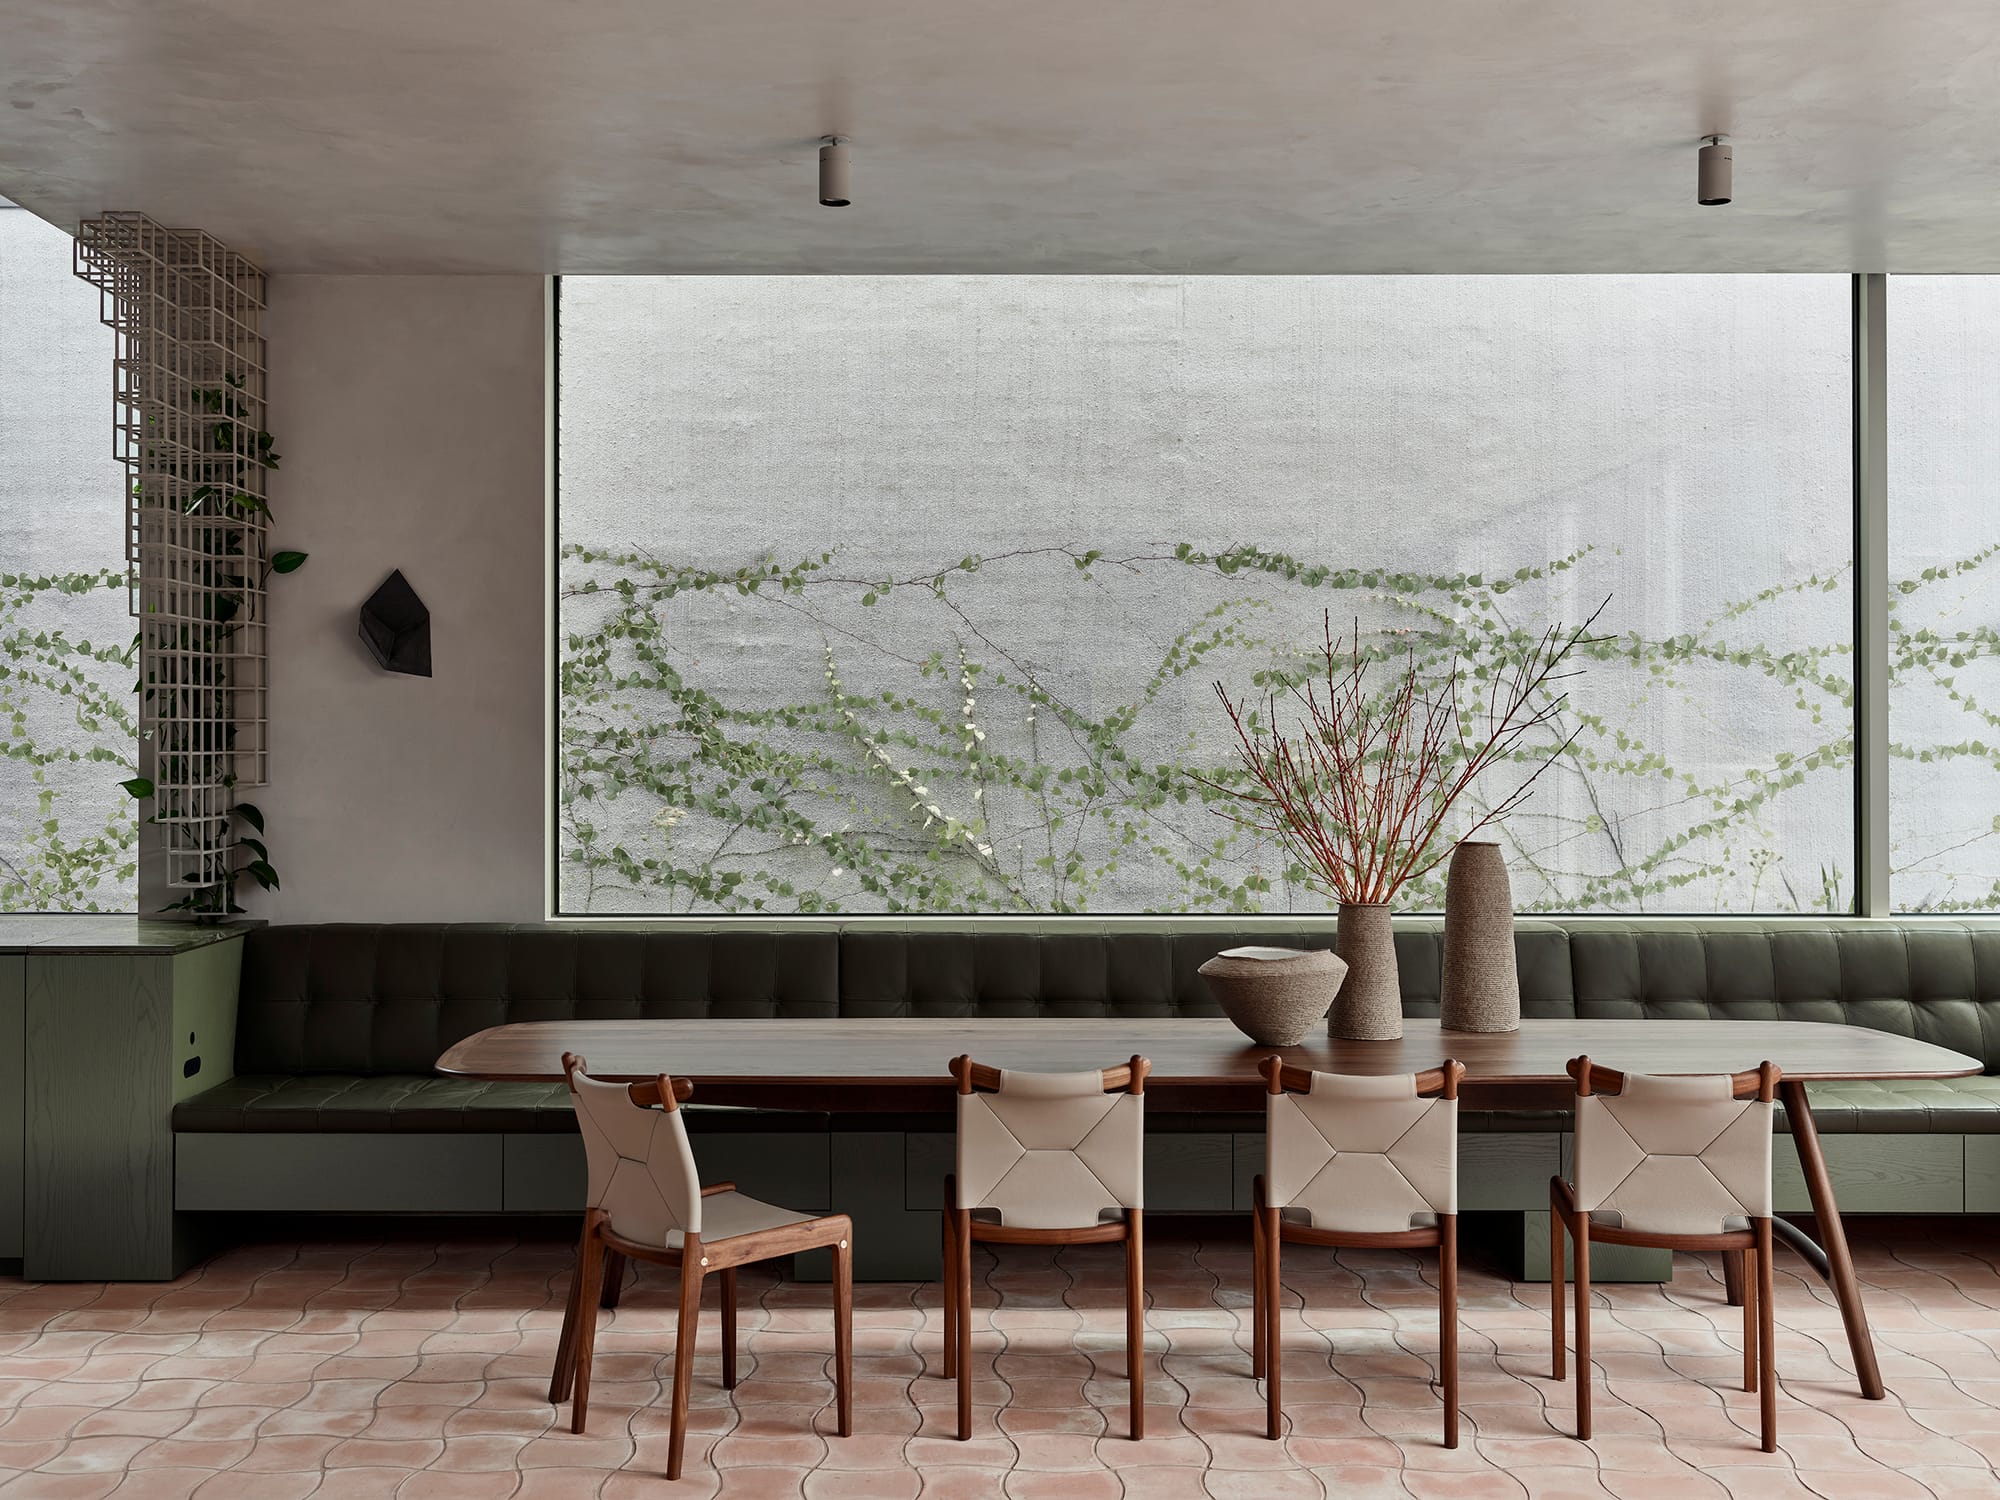 Terra Firma by RobsonRak. Photography by Mark Roper showing the banquet seating in the dining room and view out to a brick wall with a green creeper